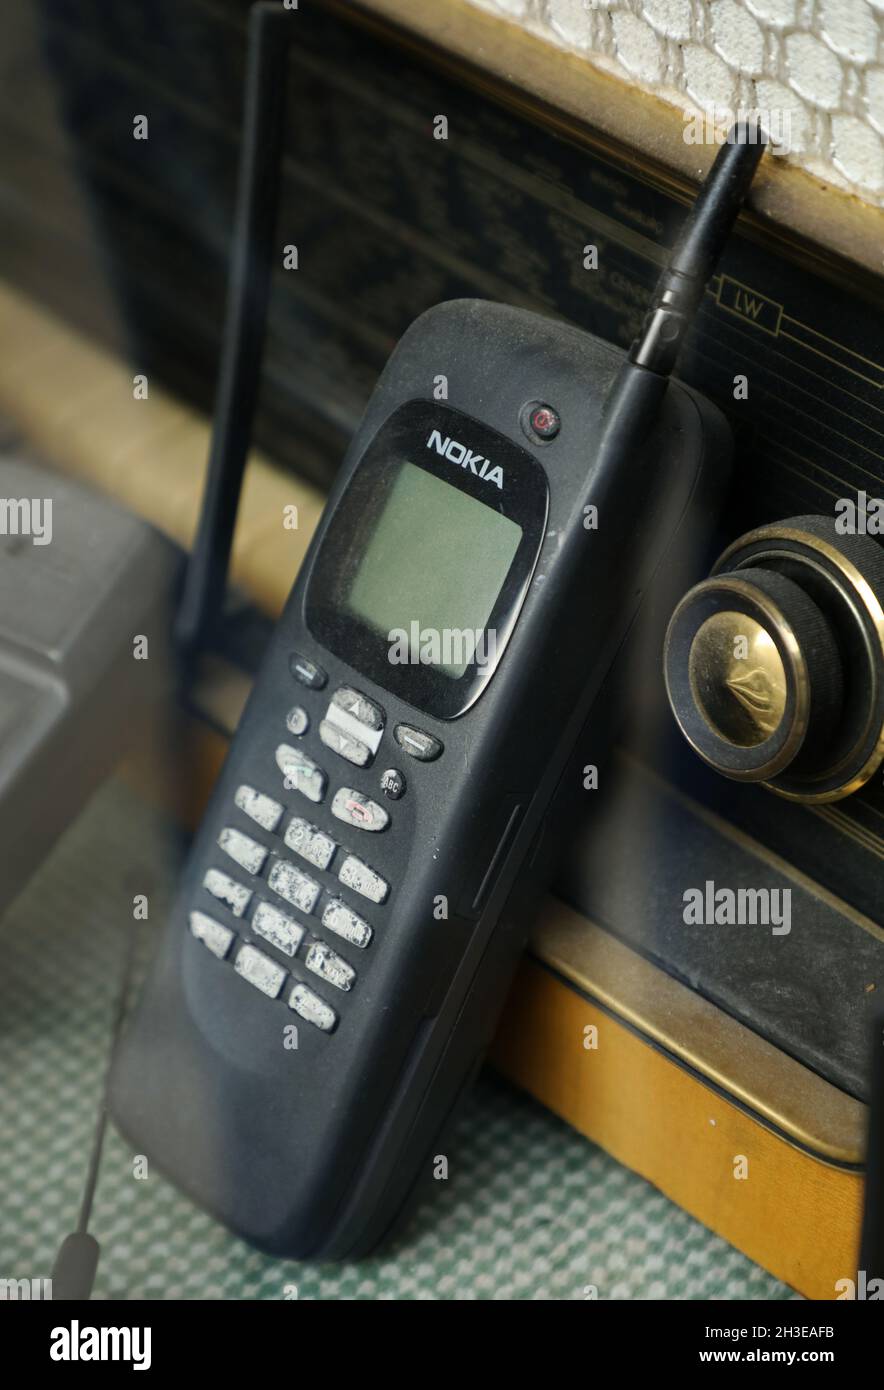 Old Nokia cell phone in a store front, in Stockholm, Sweden. Stock Photo